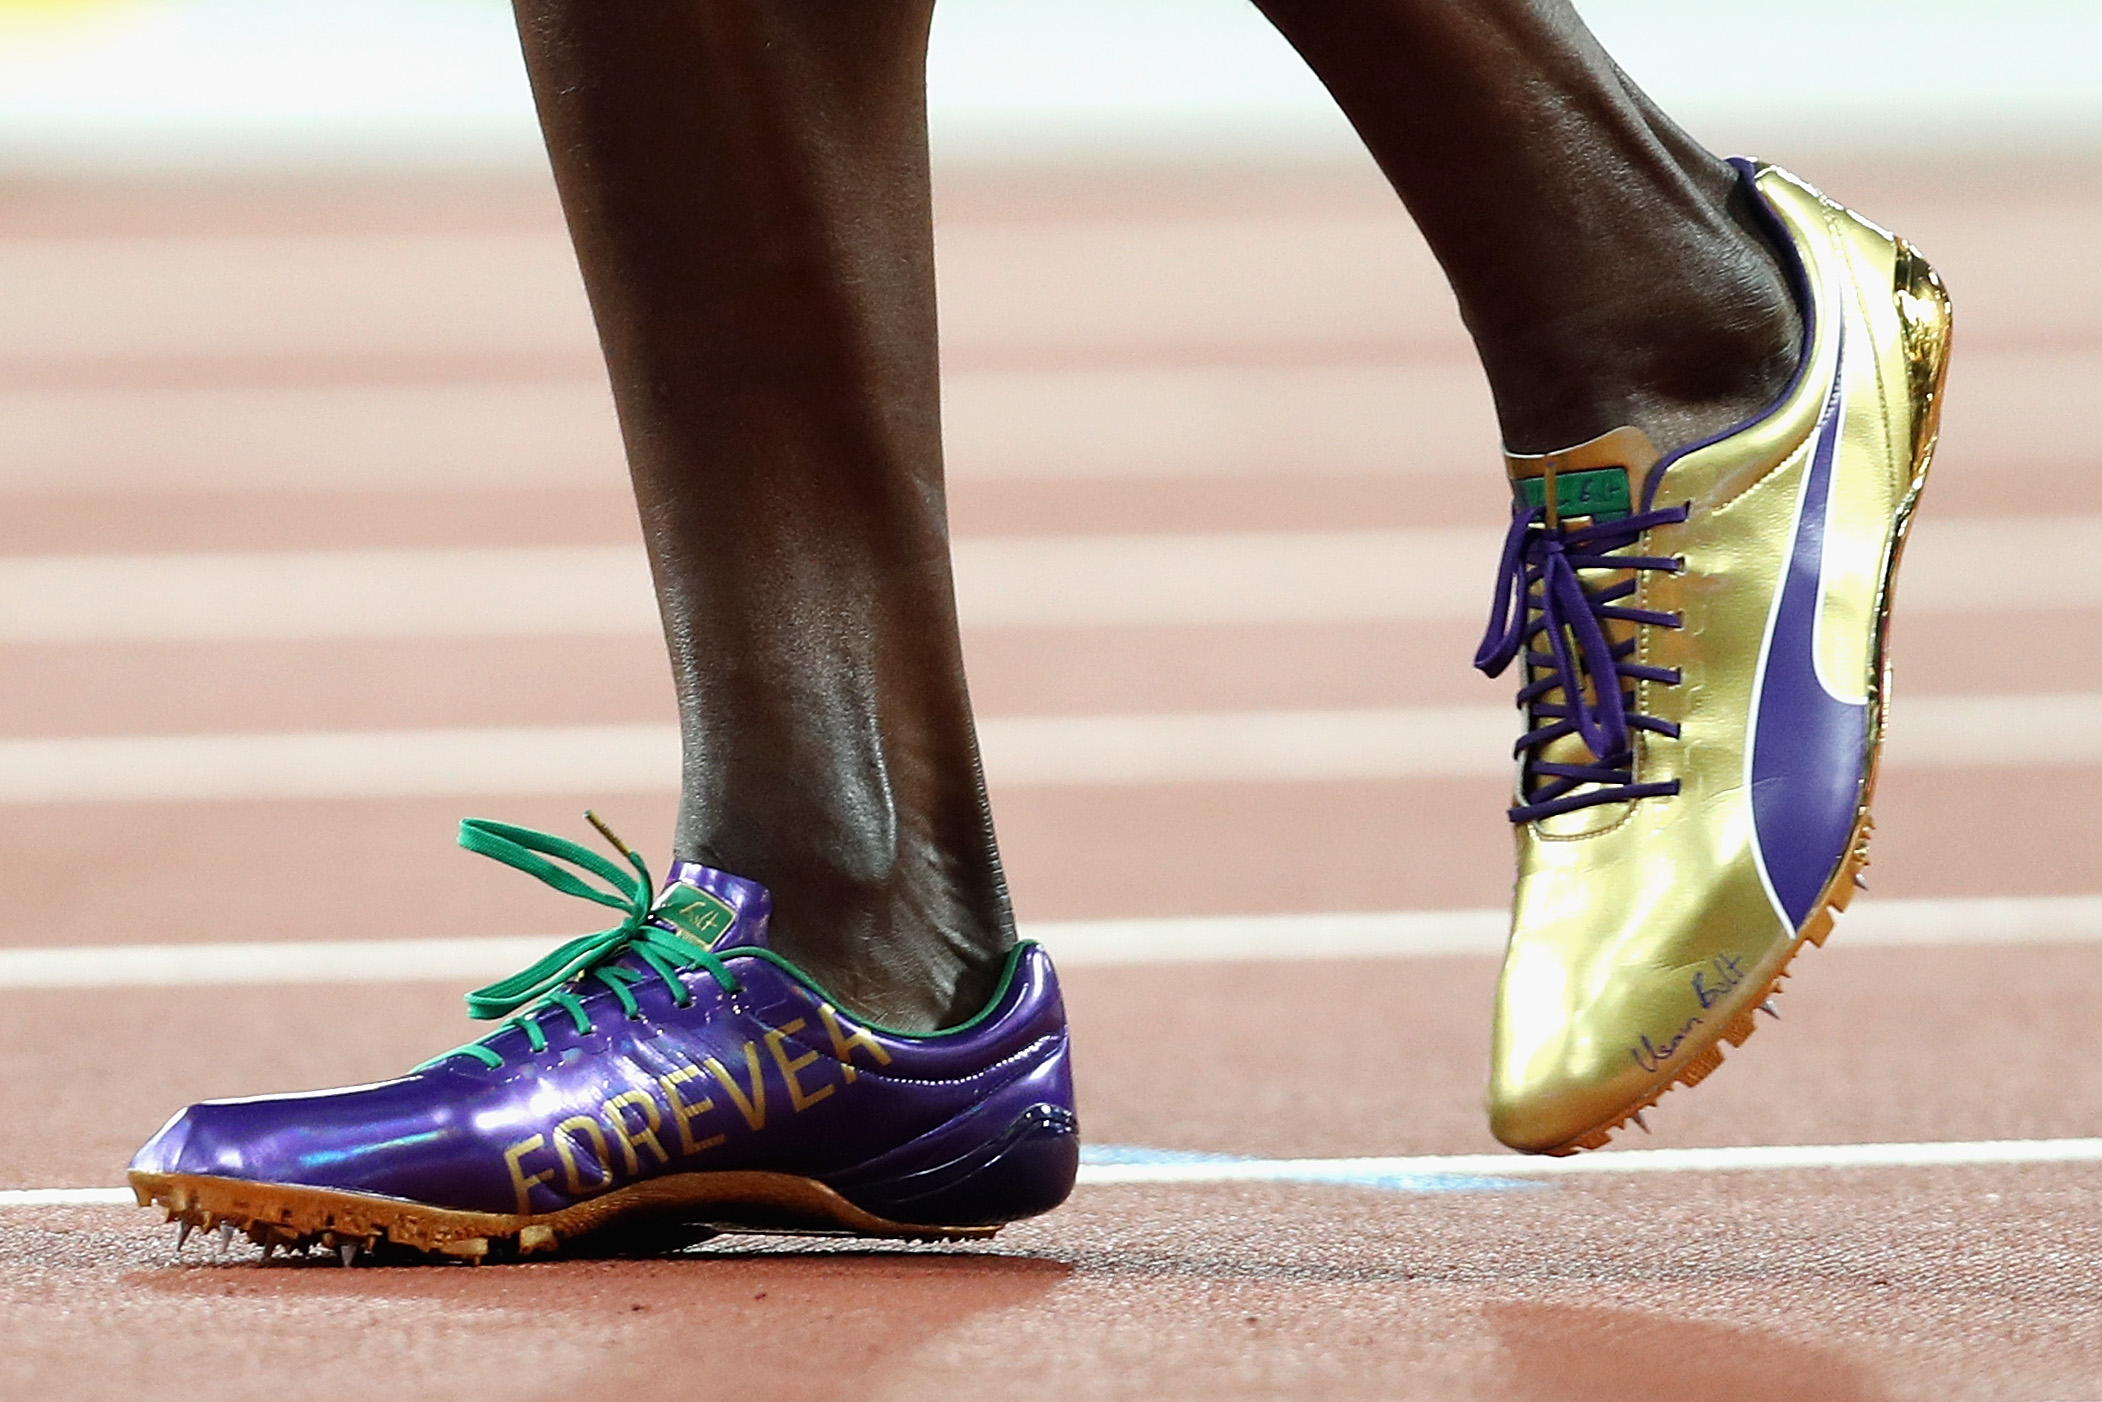 Usain Bolt has perfect shoes for his 